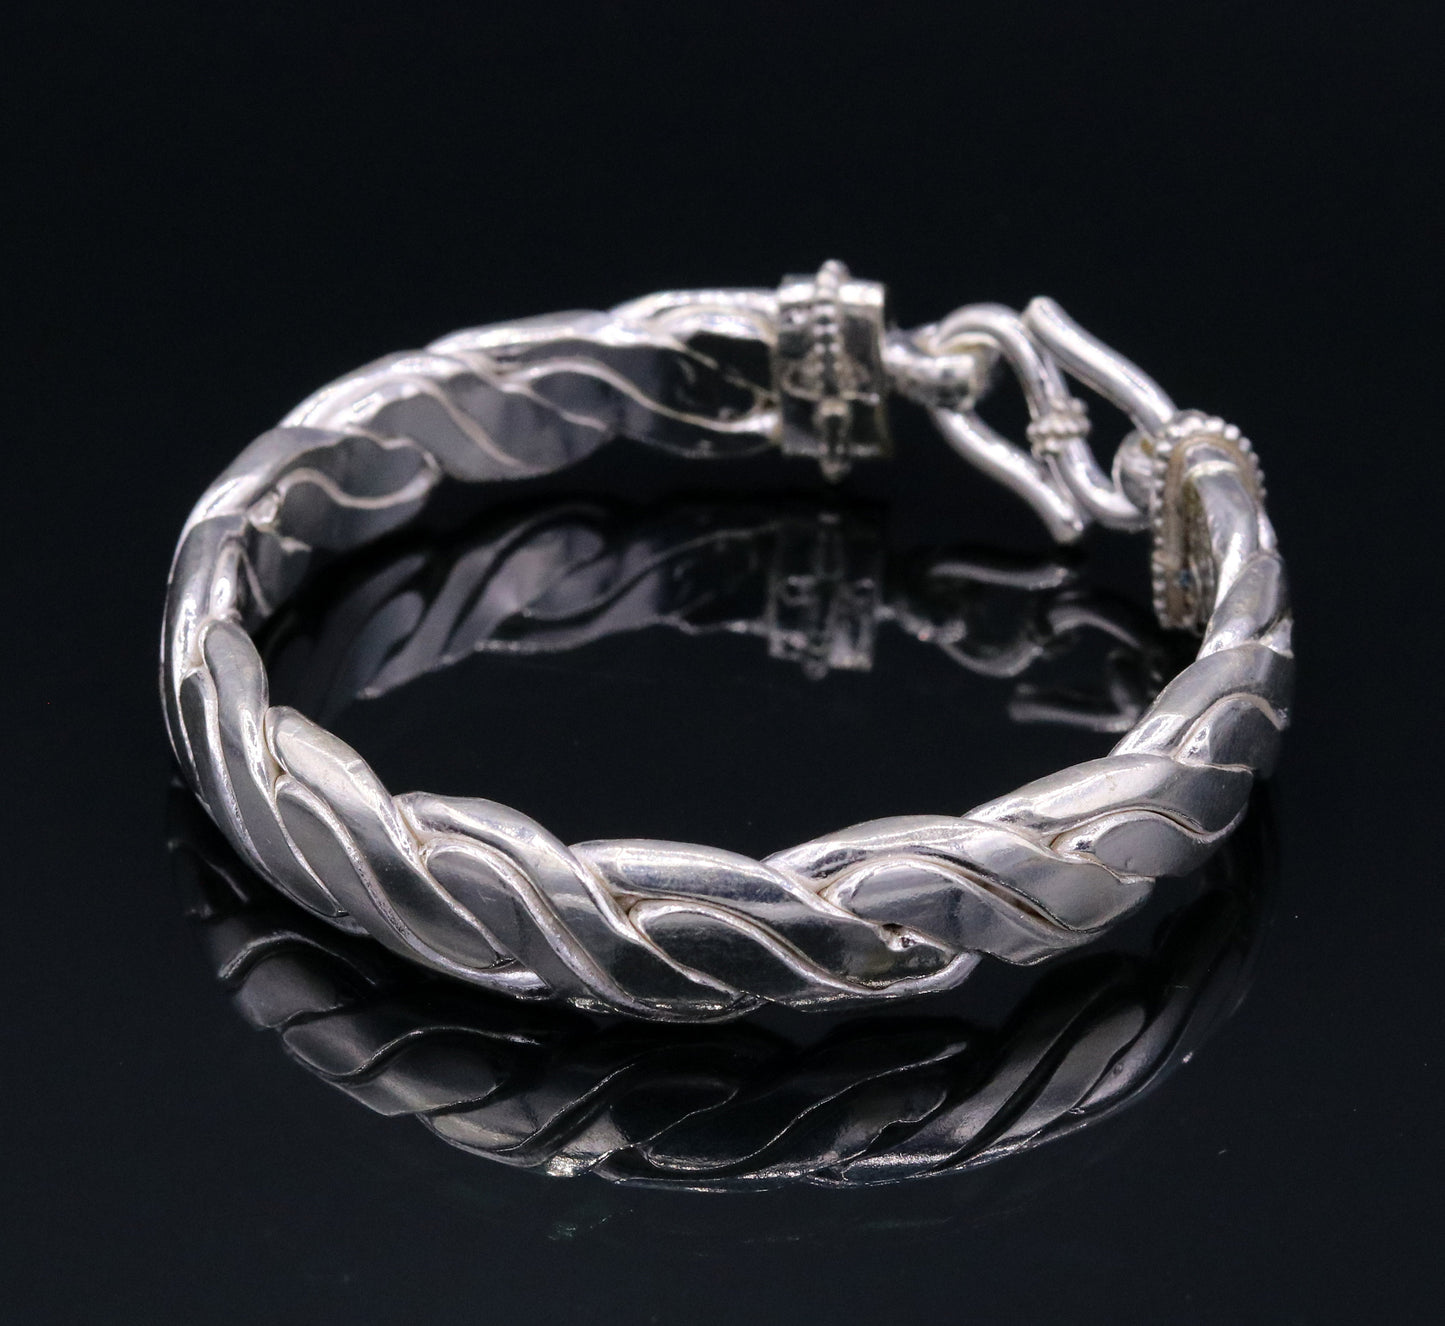 Vintage antique design handmade excellent authentic solid silver bracelet kada amazing gifting jewelry nsk59 - TRIBAL ORNAMENTS